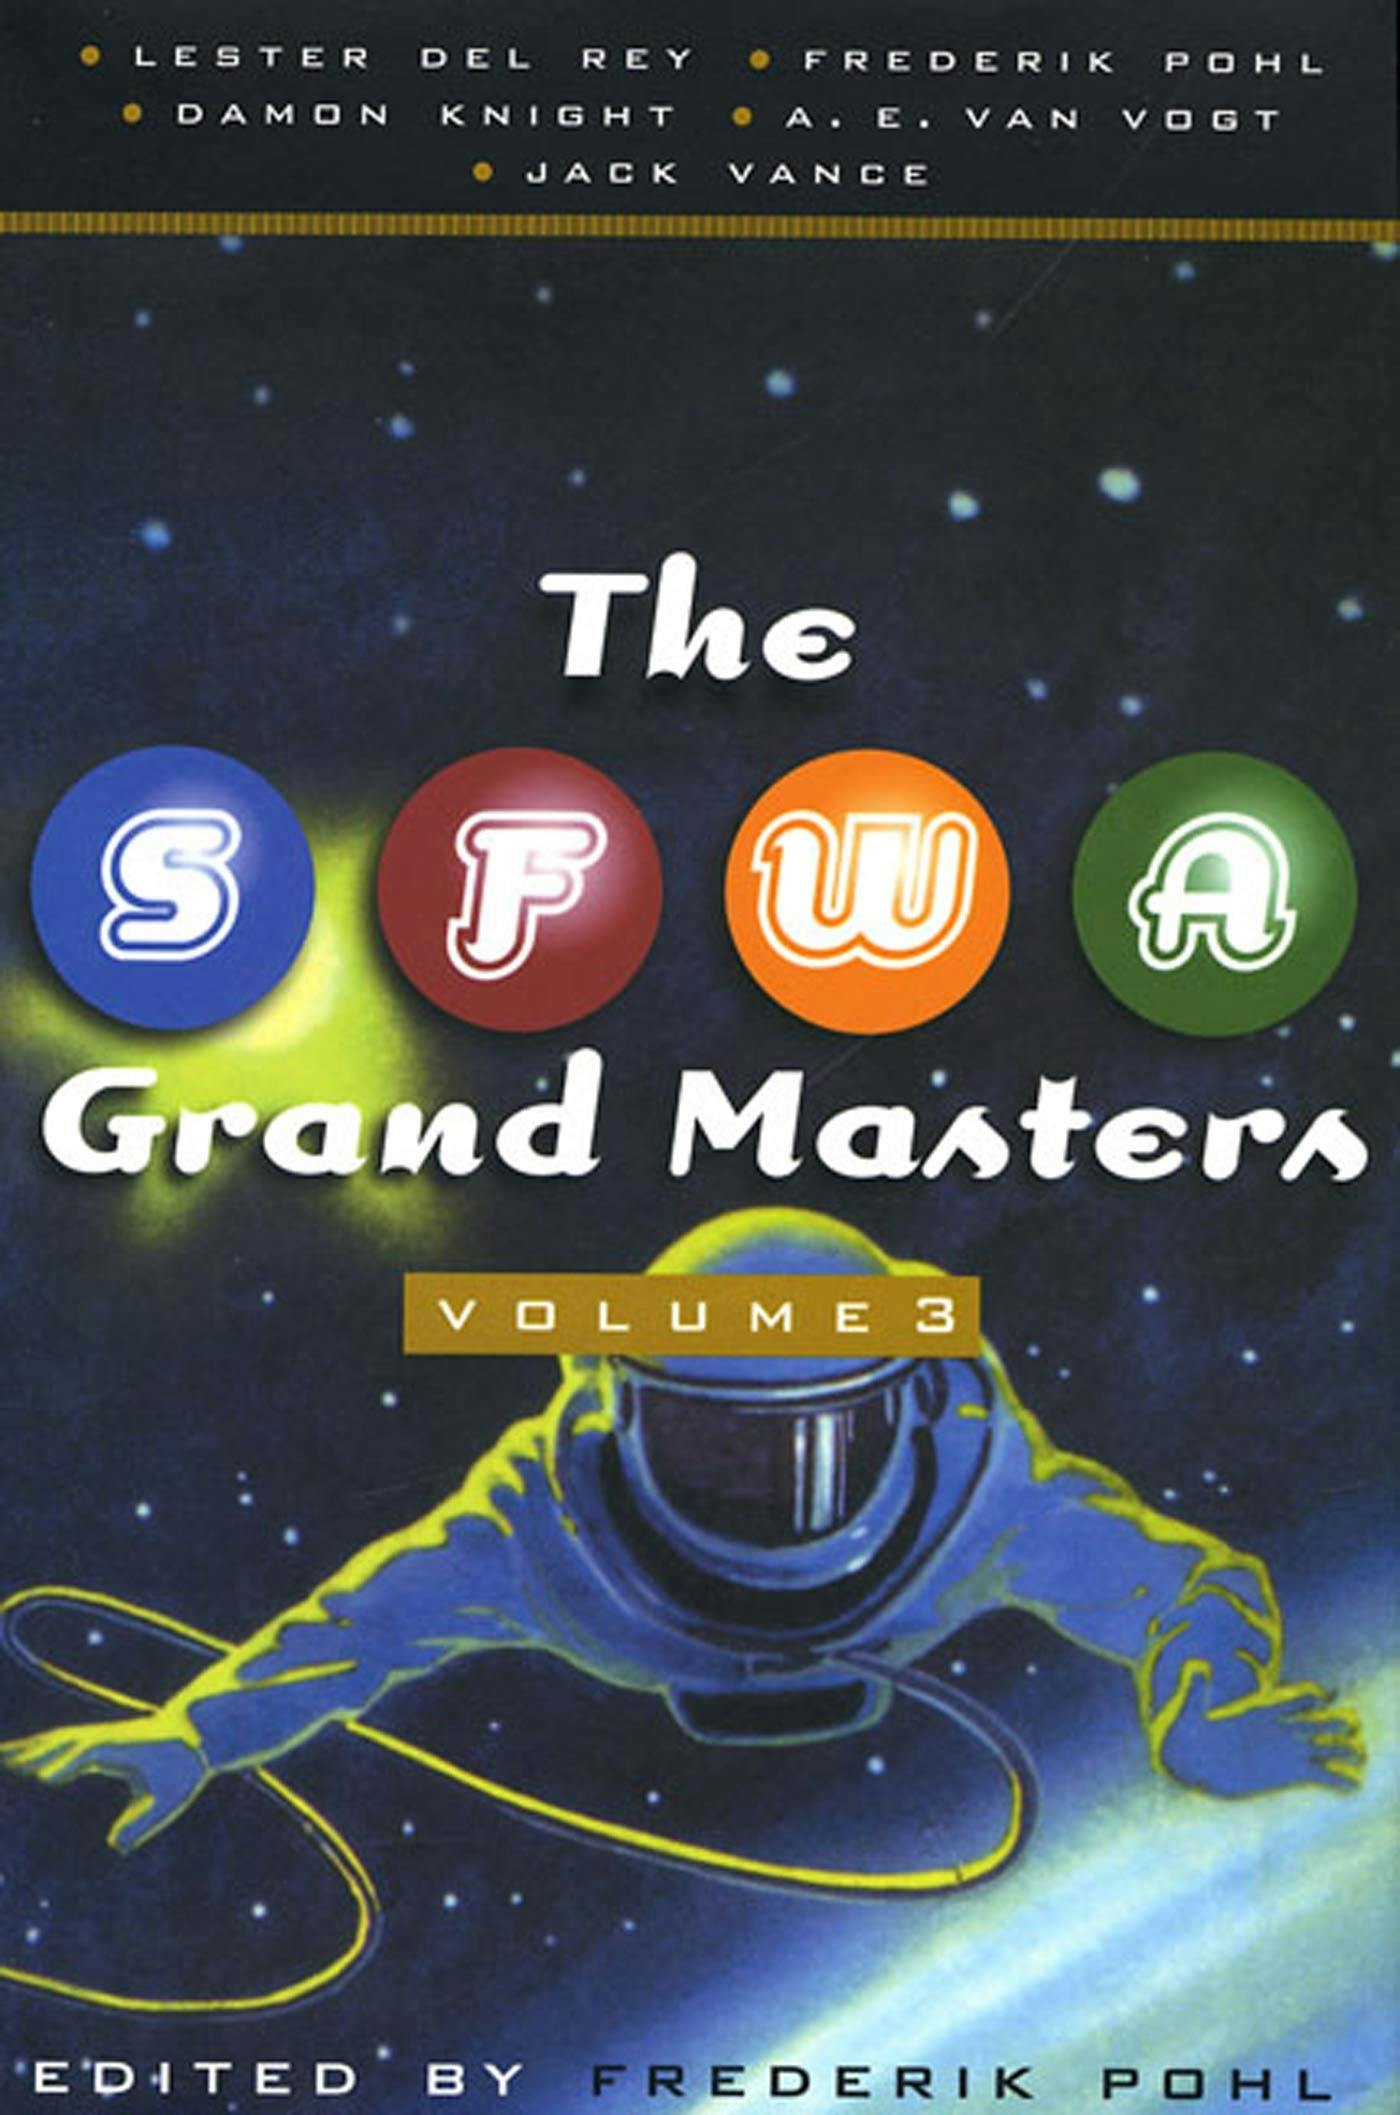 Cover for the book titled as: The SFWA Grand Masters: Volume 3